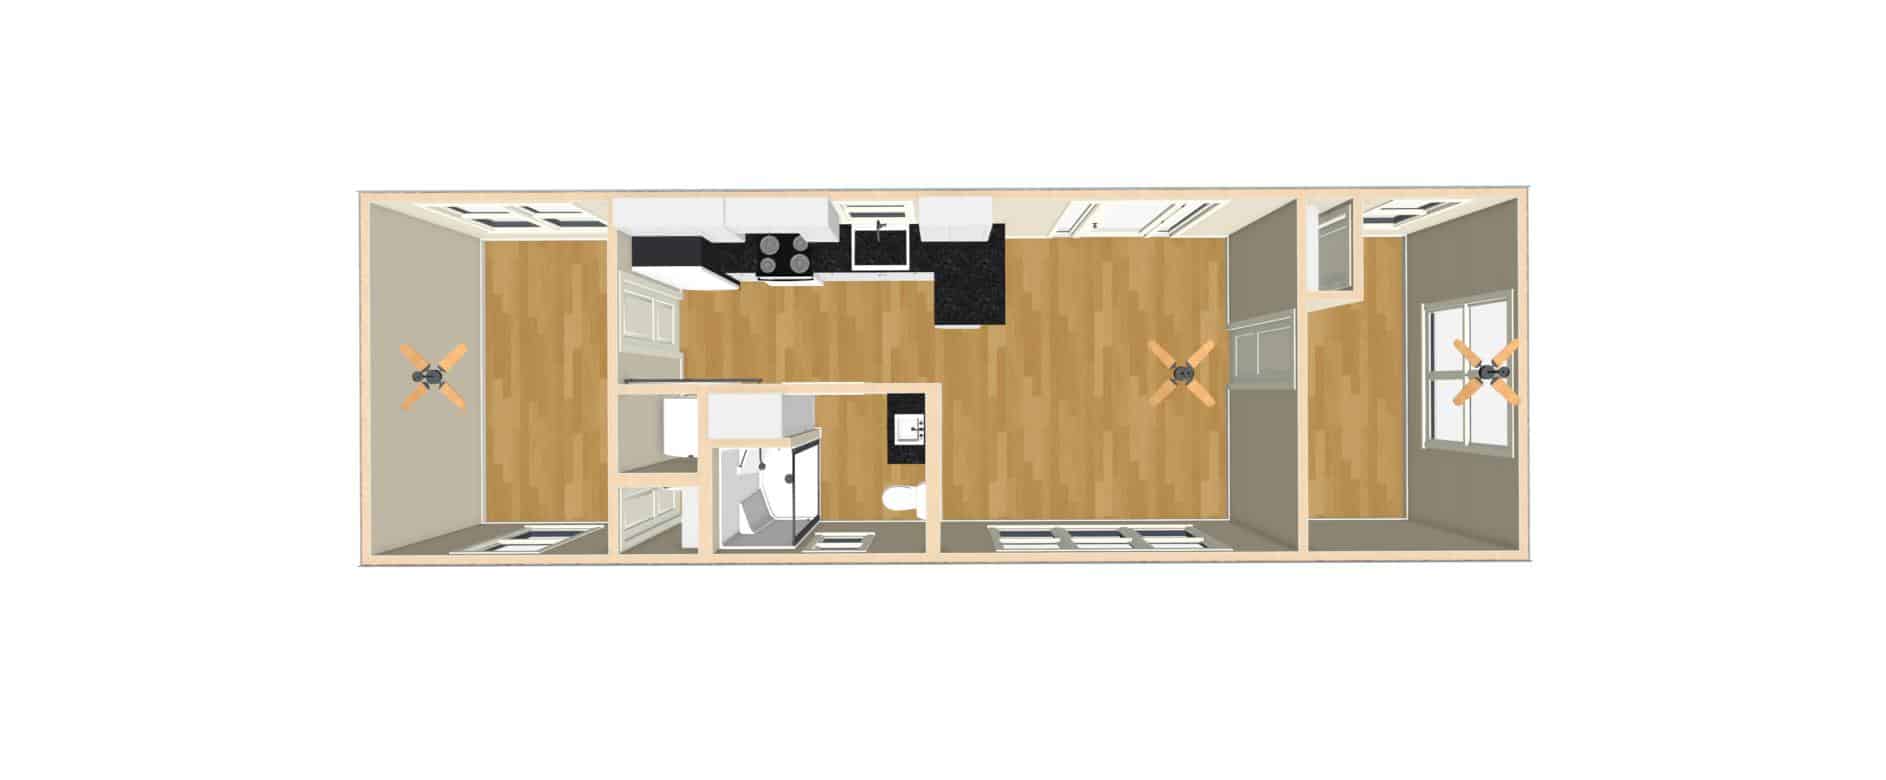 floor plans for prefab tiny home cabins